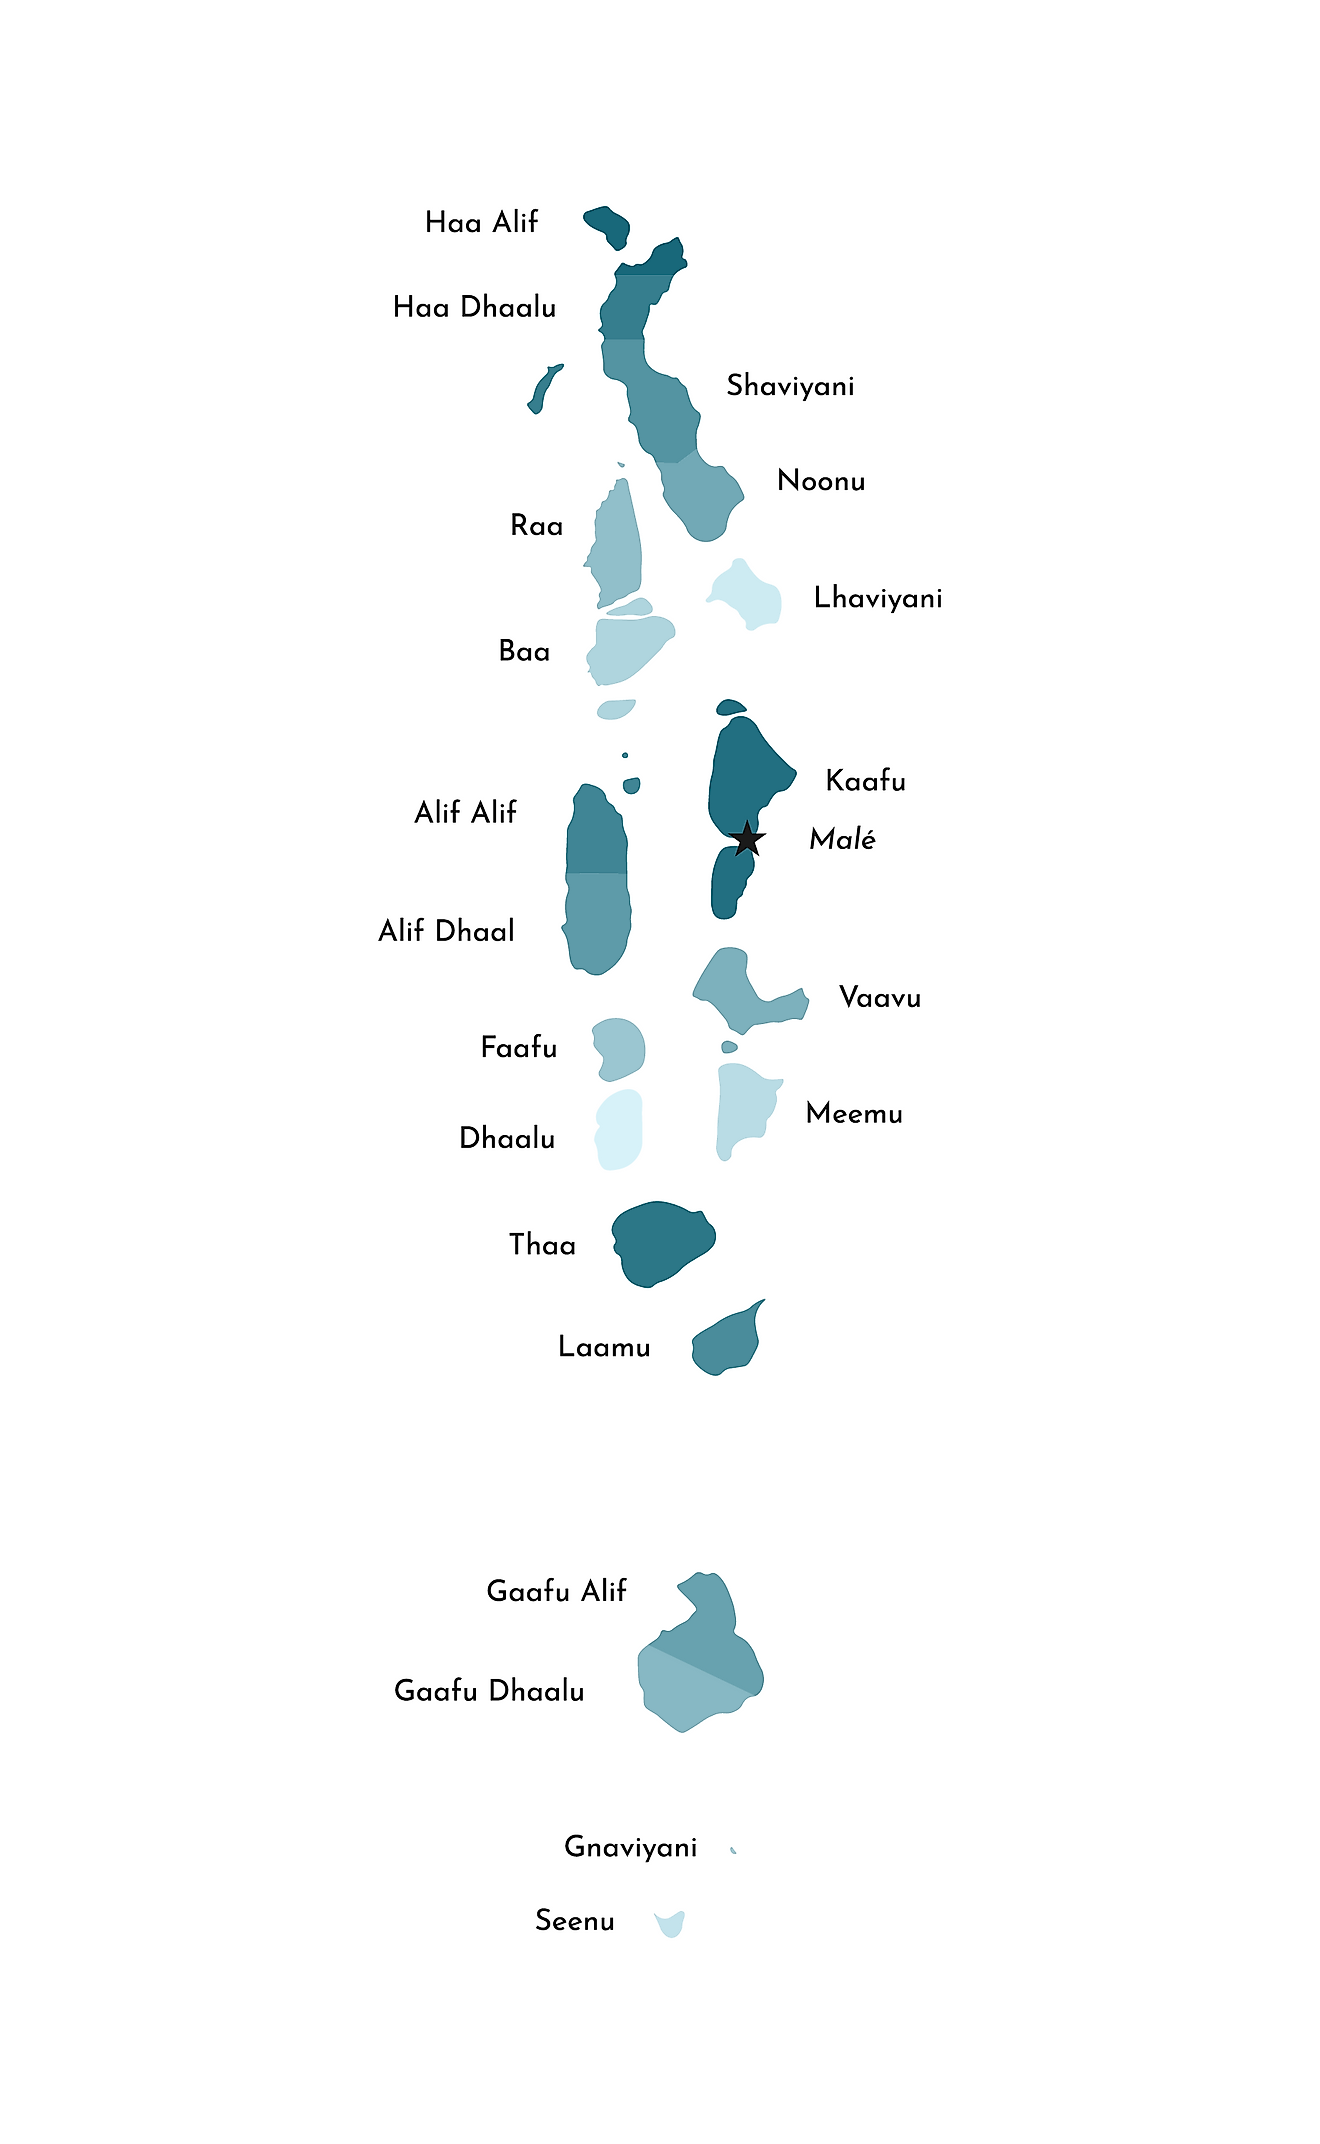 The Political Map of Maldives displaying its 21 atolls.